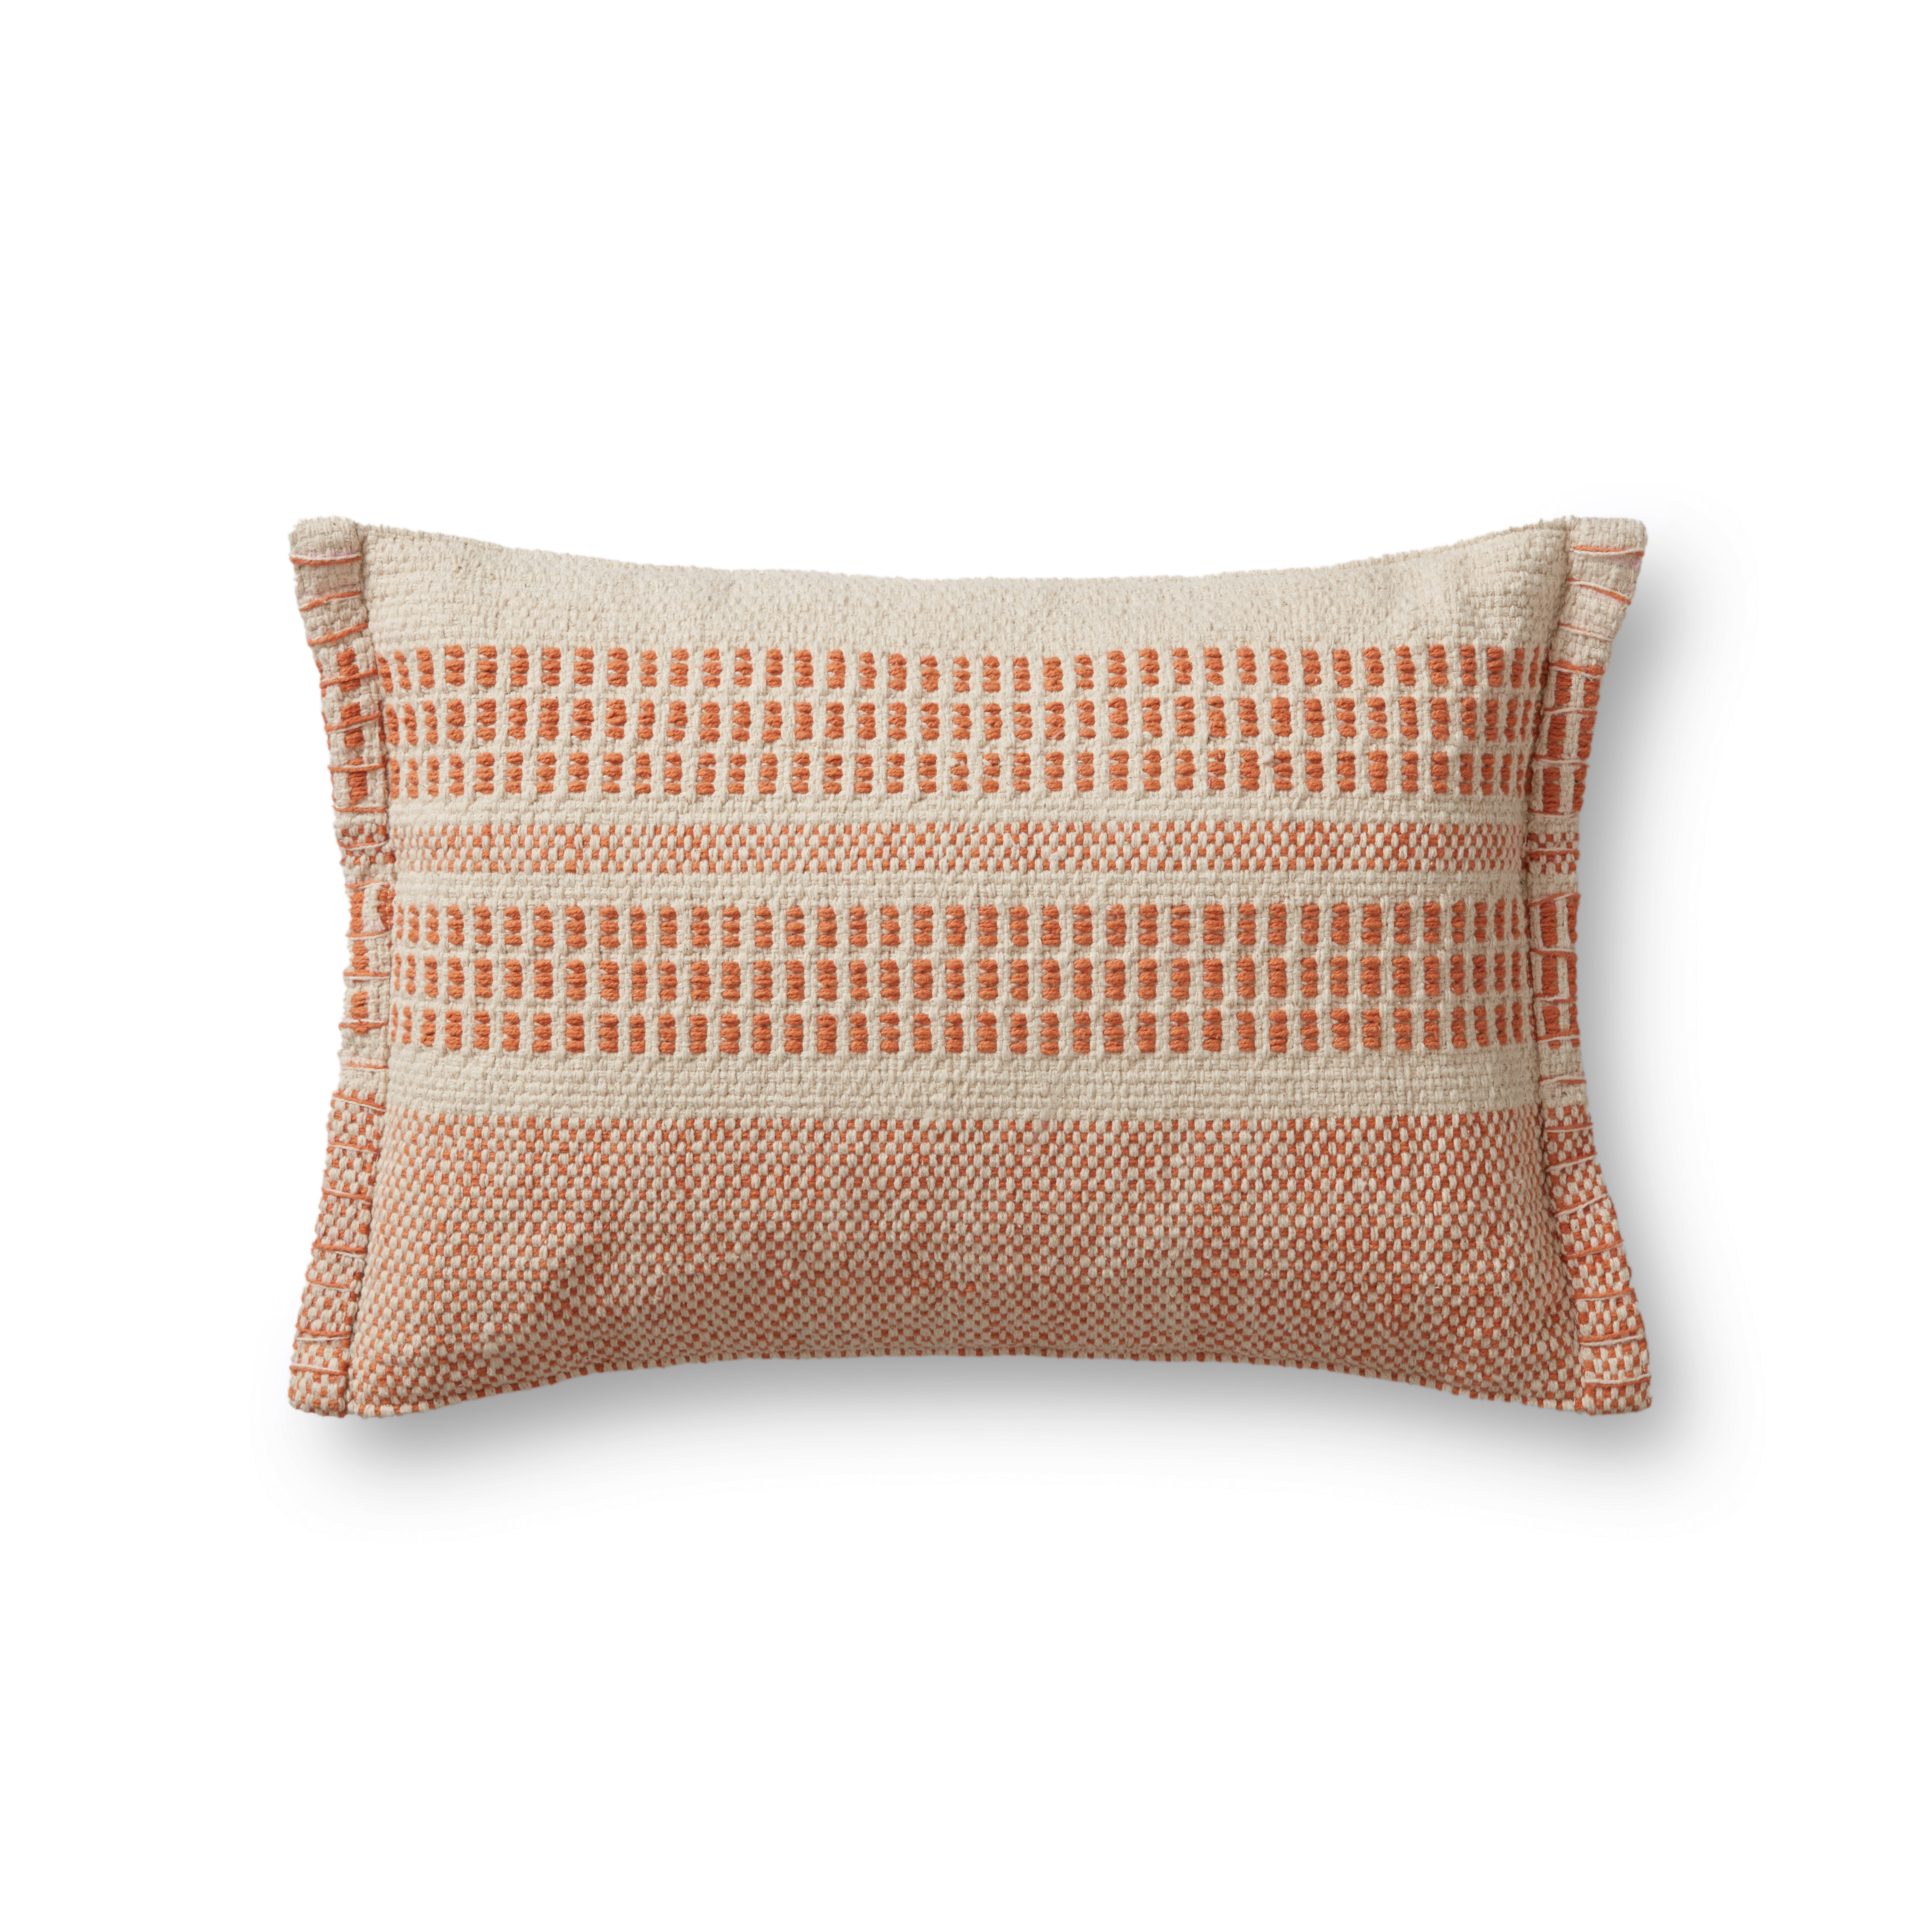 PILLOWS P1173 NATURAL / RUST 13" x 21" Cover w/Poly - Magnolia Home by Joana Gaines Crafted by Loloi Rugs